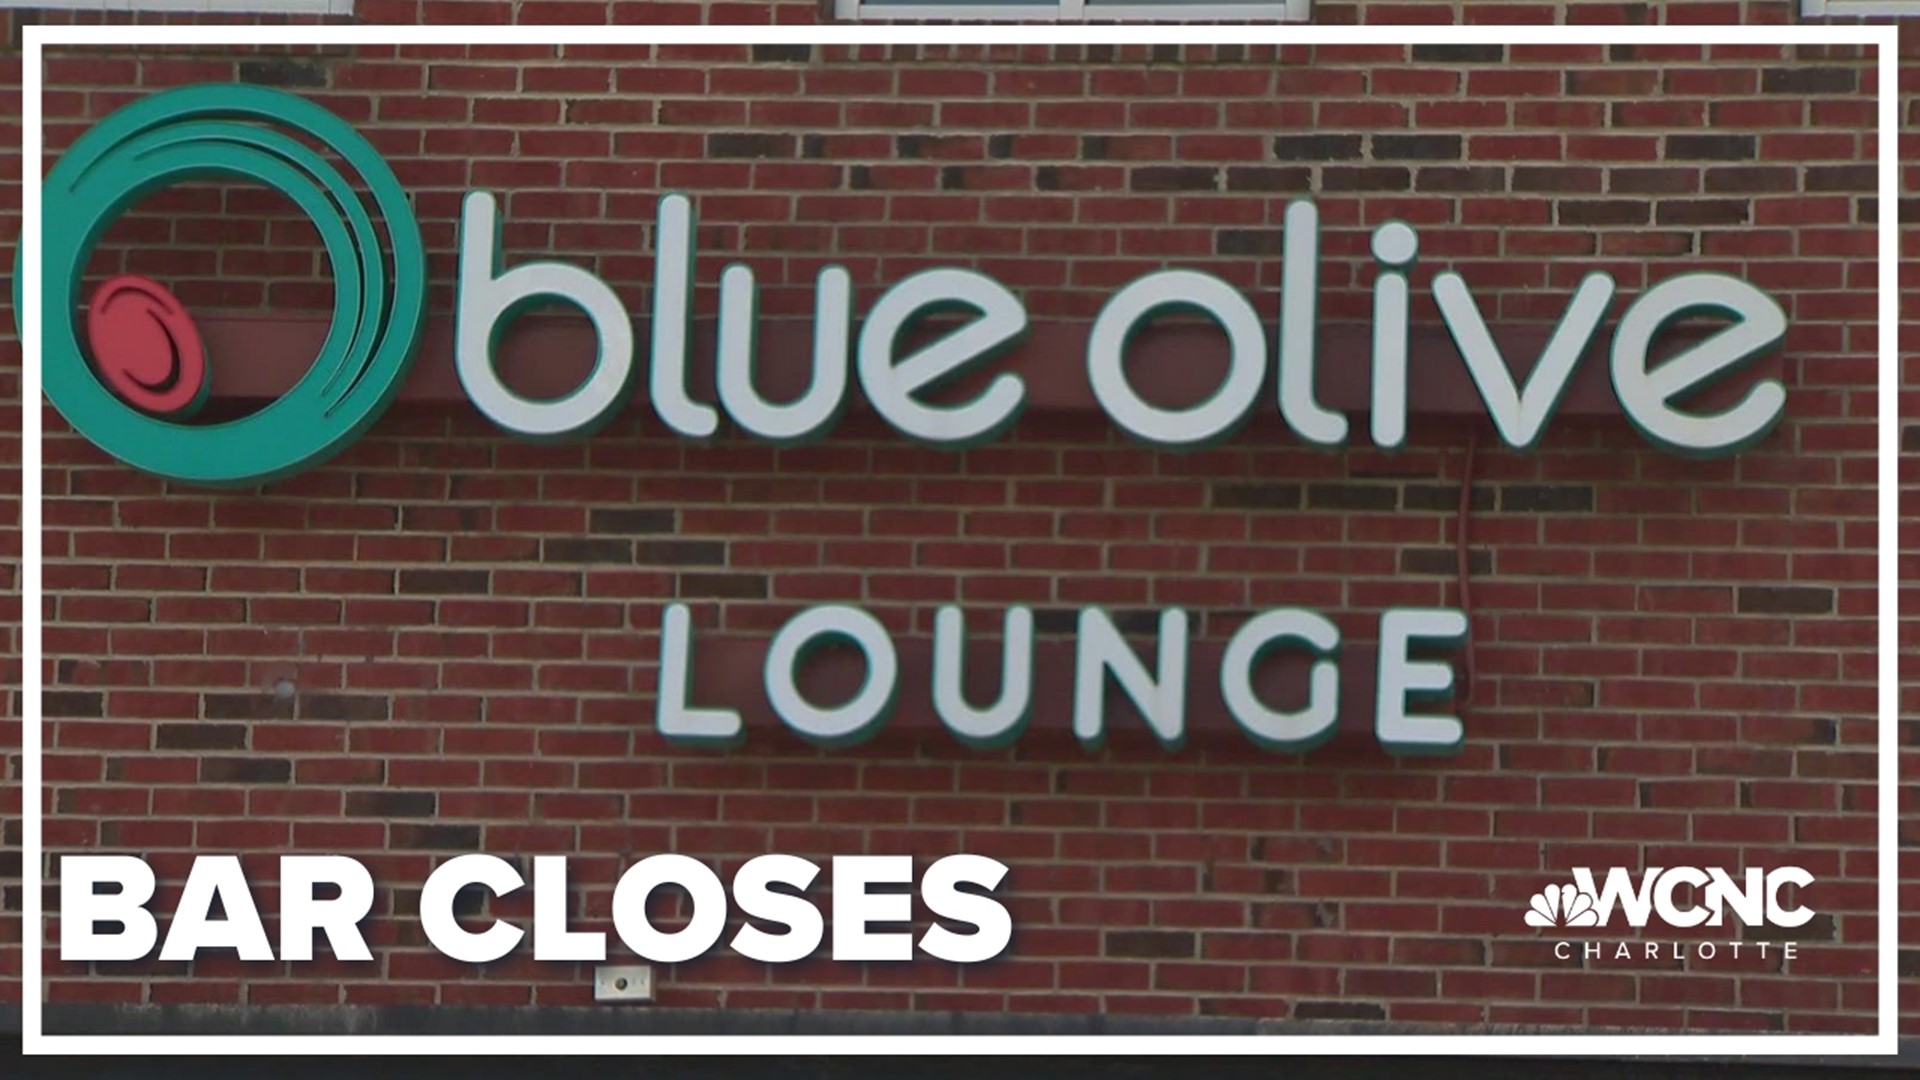 Blue Olive Lounge Ballantyne announced it would be "closed permanently effective immediately" on its social media platforms.